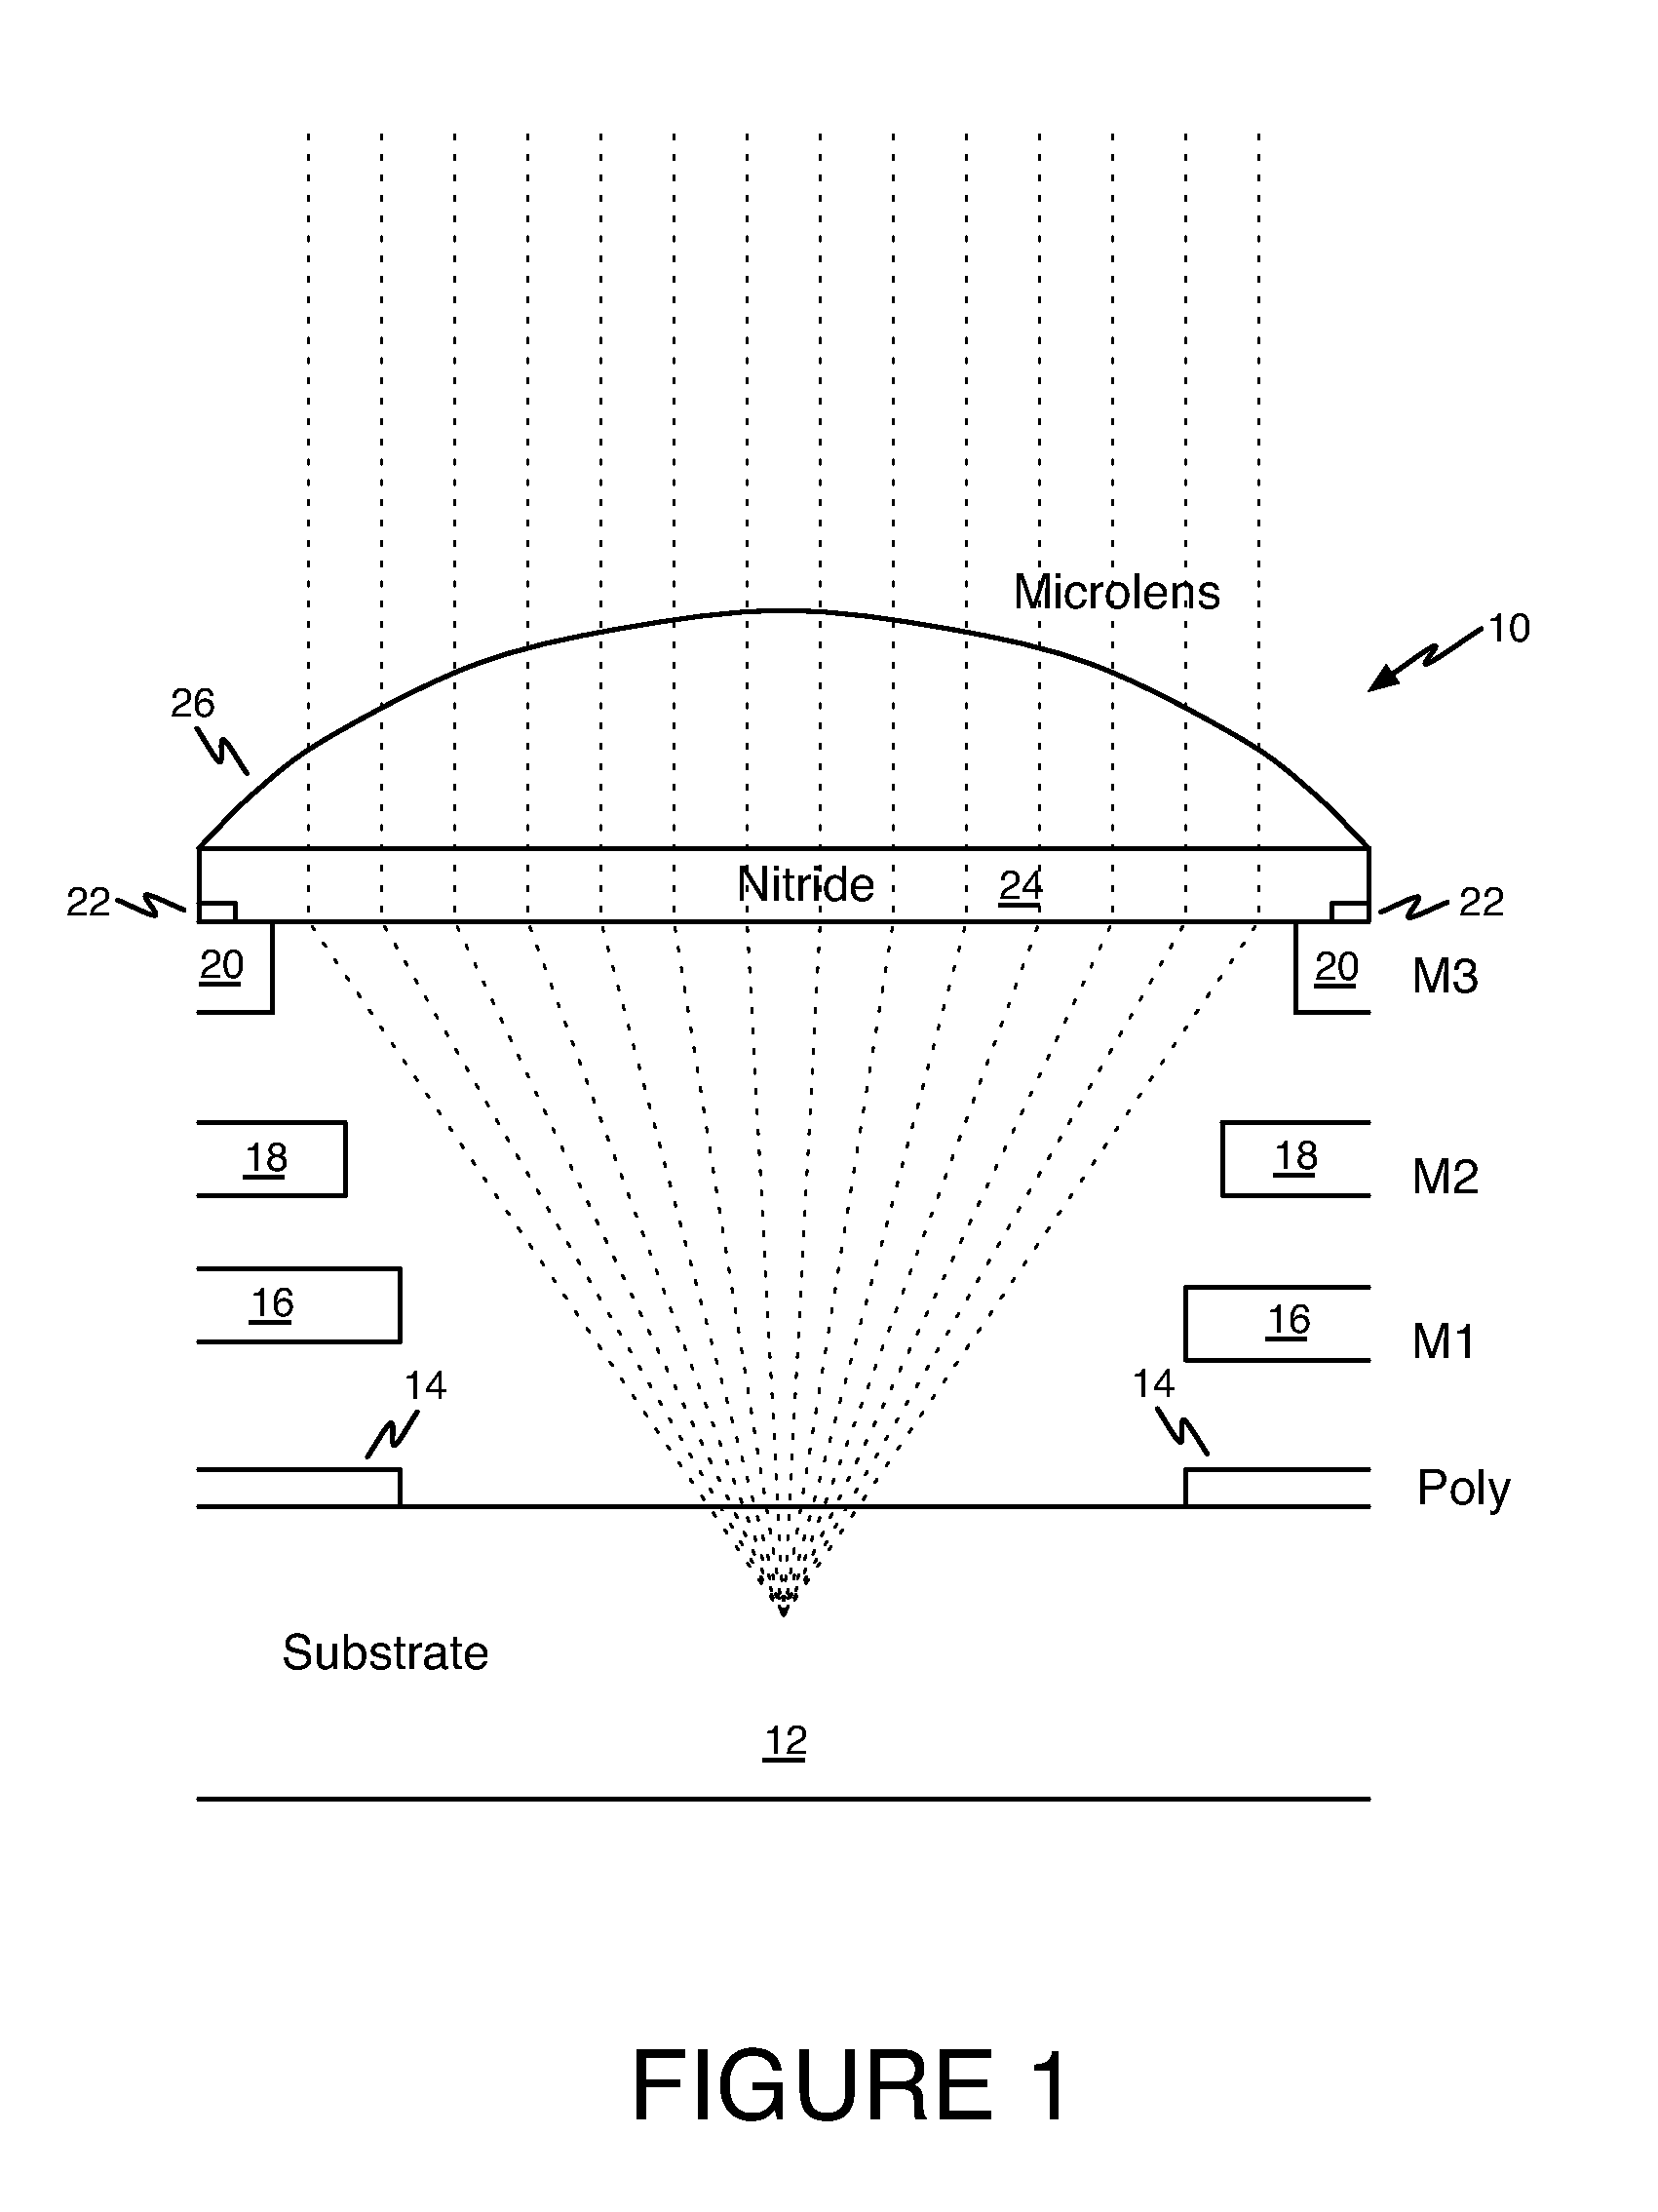 Imaging array having photodiodes with different light sensitivities and associated image restoration methods